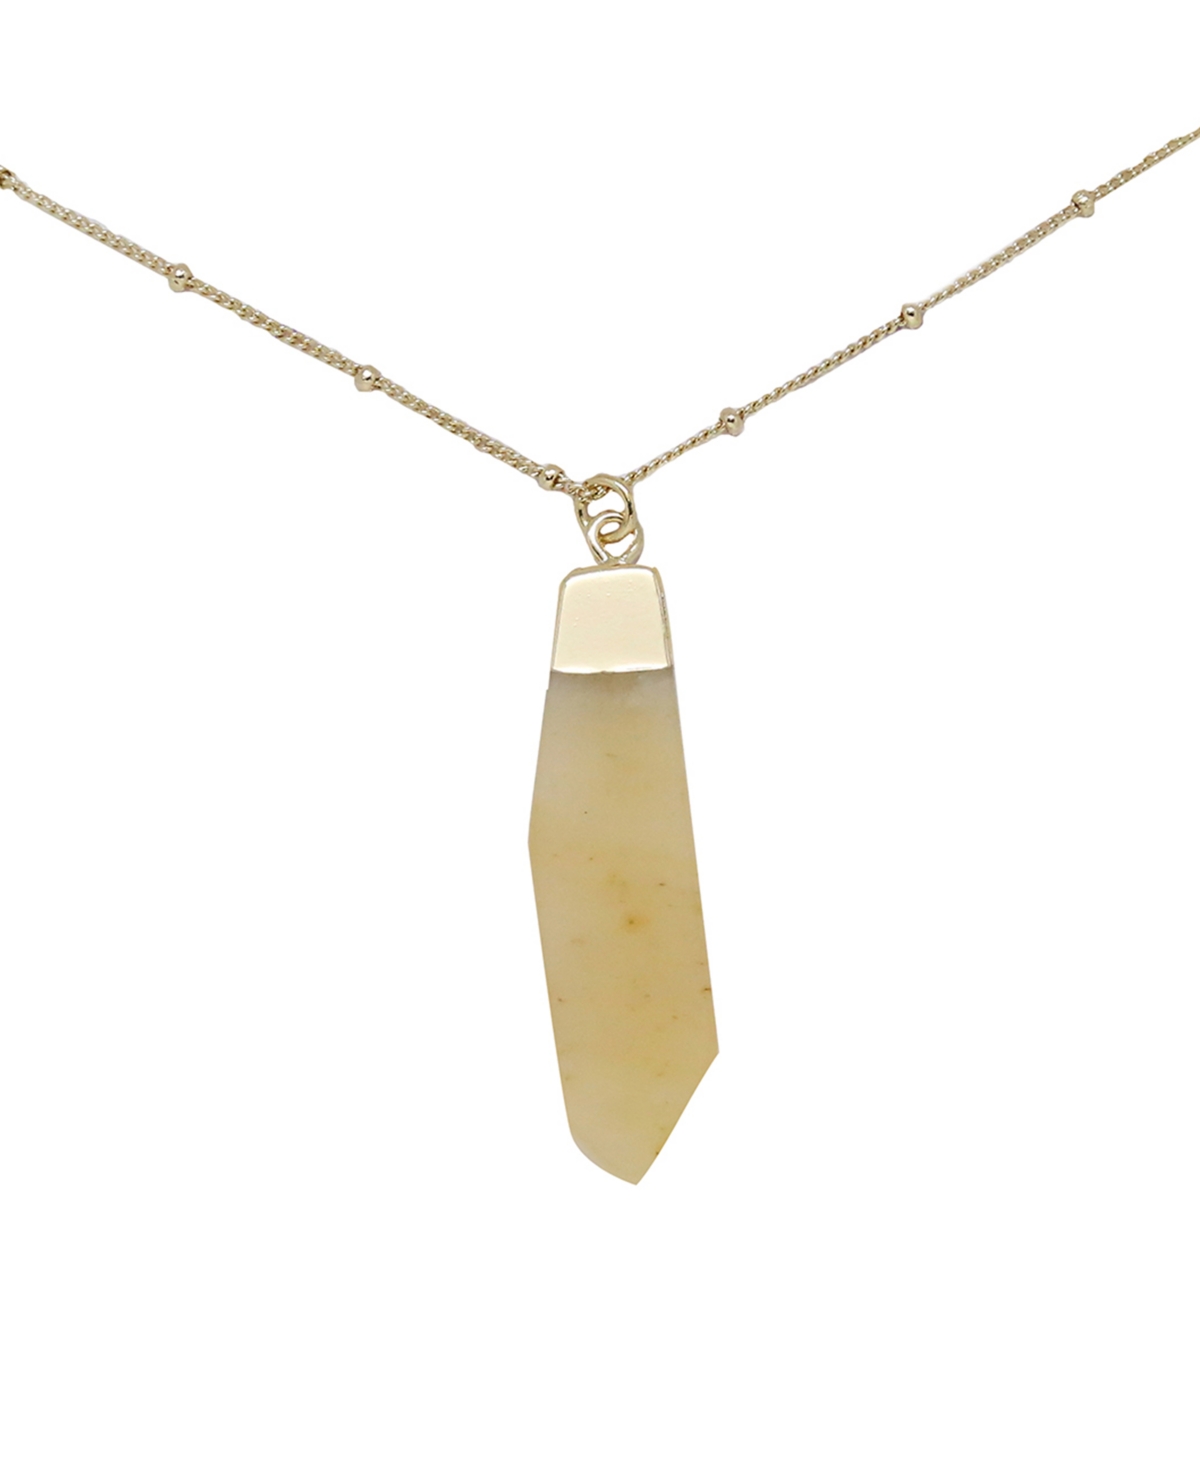 Charged Citrine Pendant Necklace